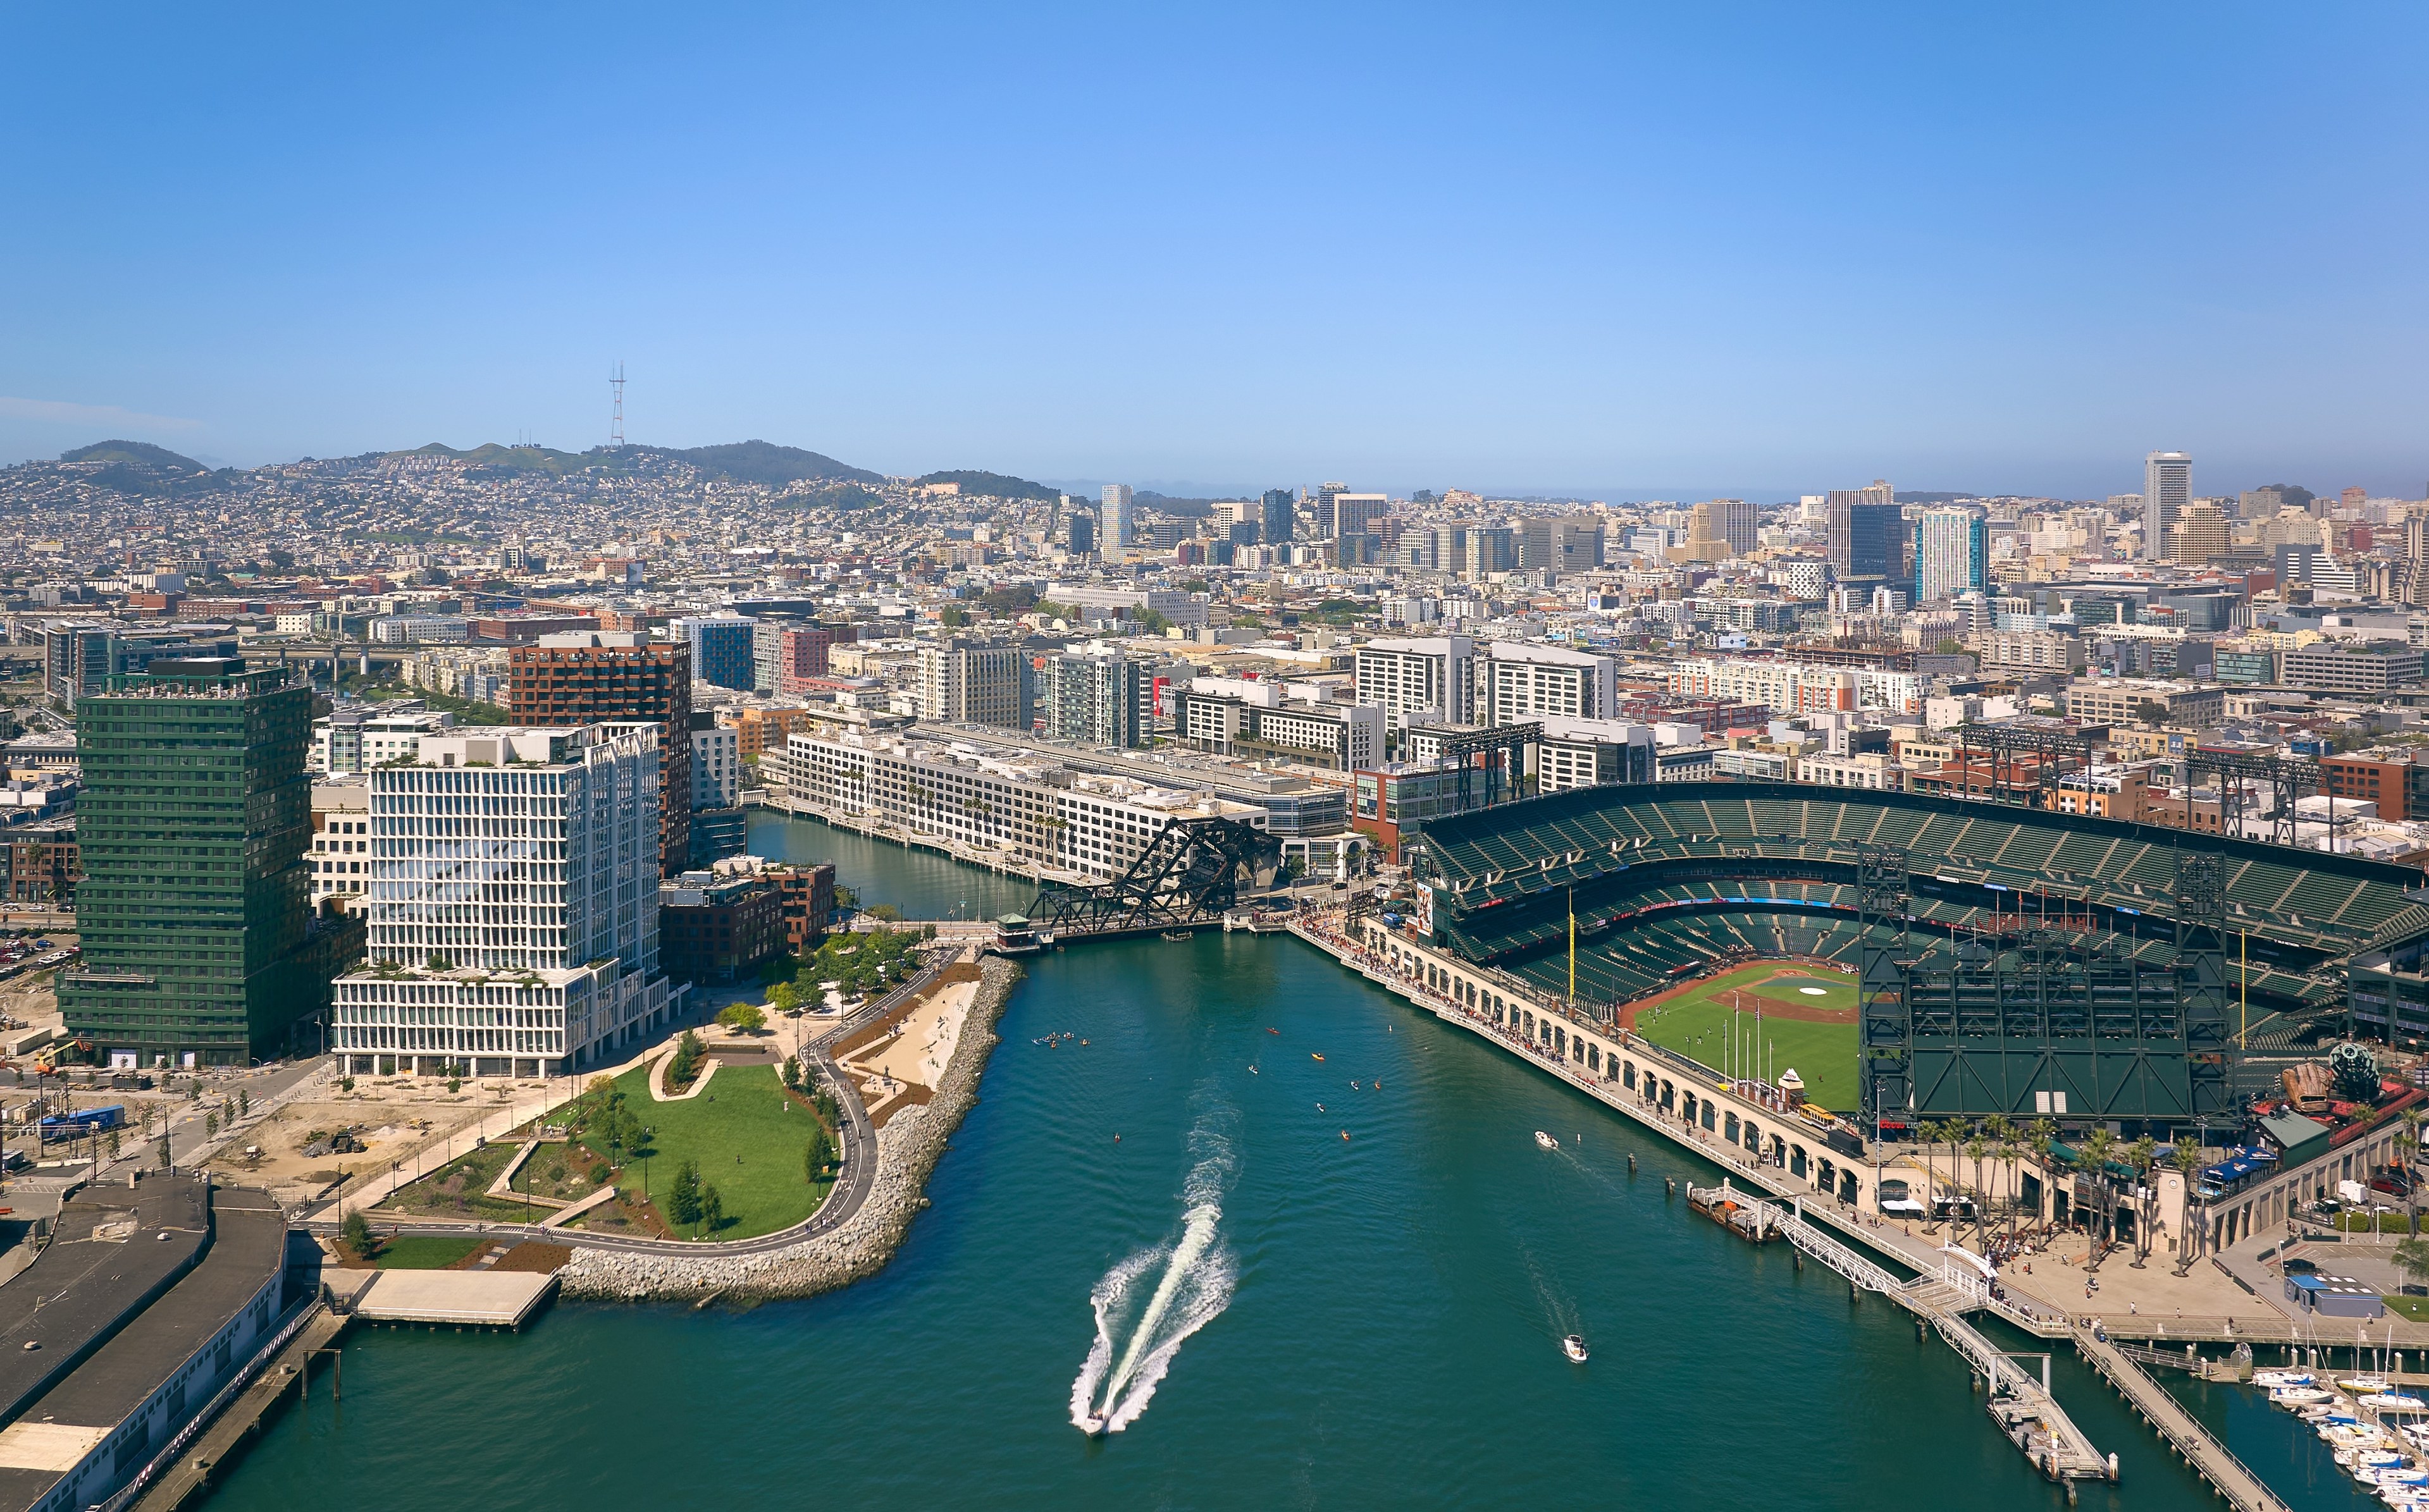 An aerial view of a city waterfront with a stadium, boats, modern buildings, and hills in the background.